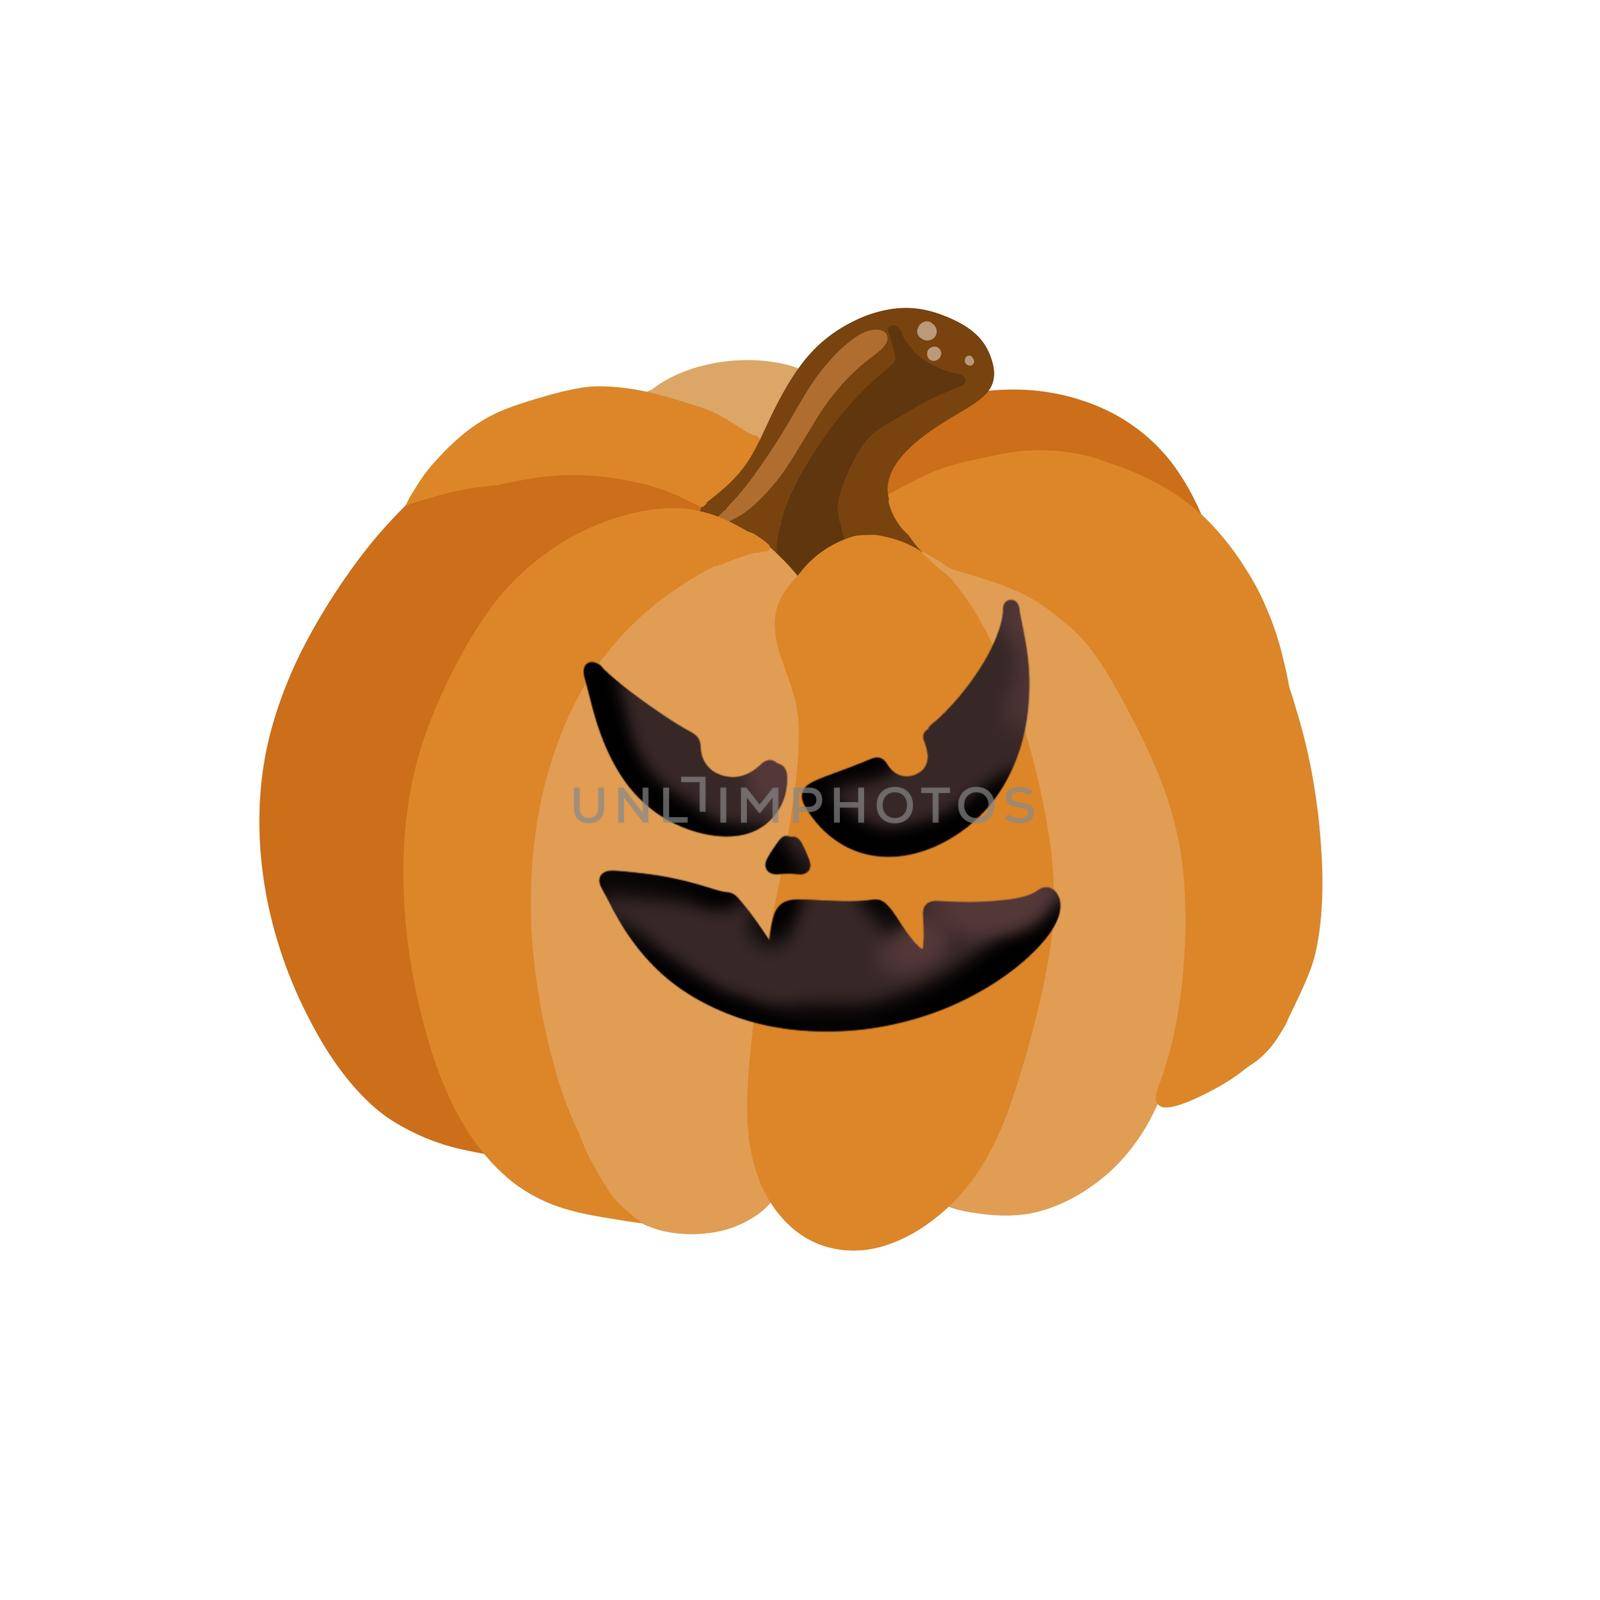 The main symbol of the holiday Happy Halloween. Orange pumpkin with a hike for your design for the Halloween holiday. Previous illustration